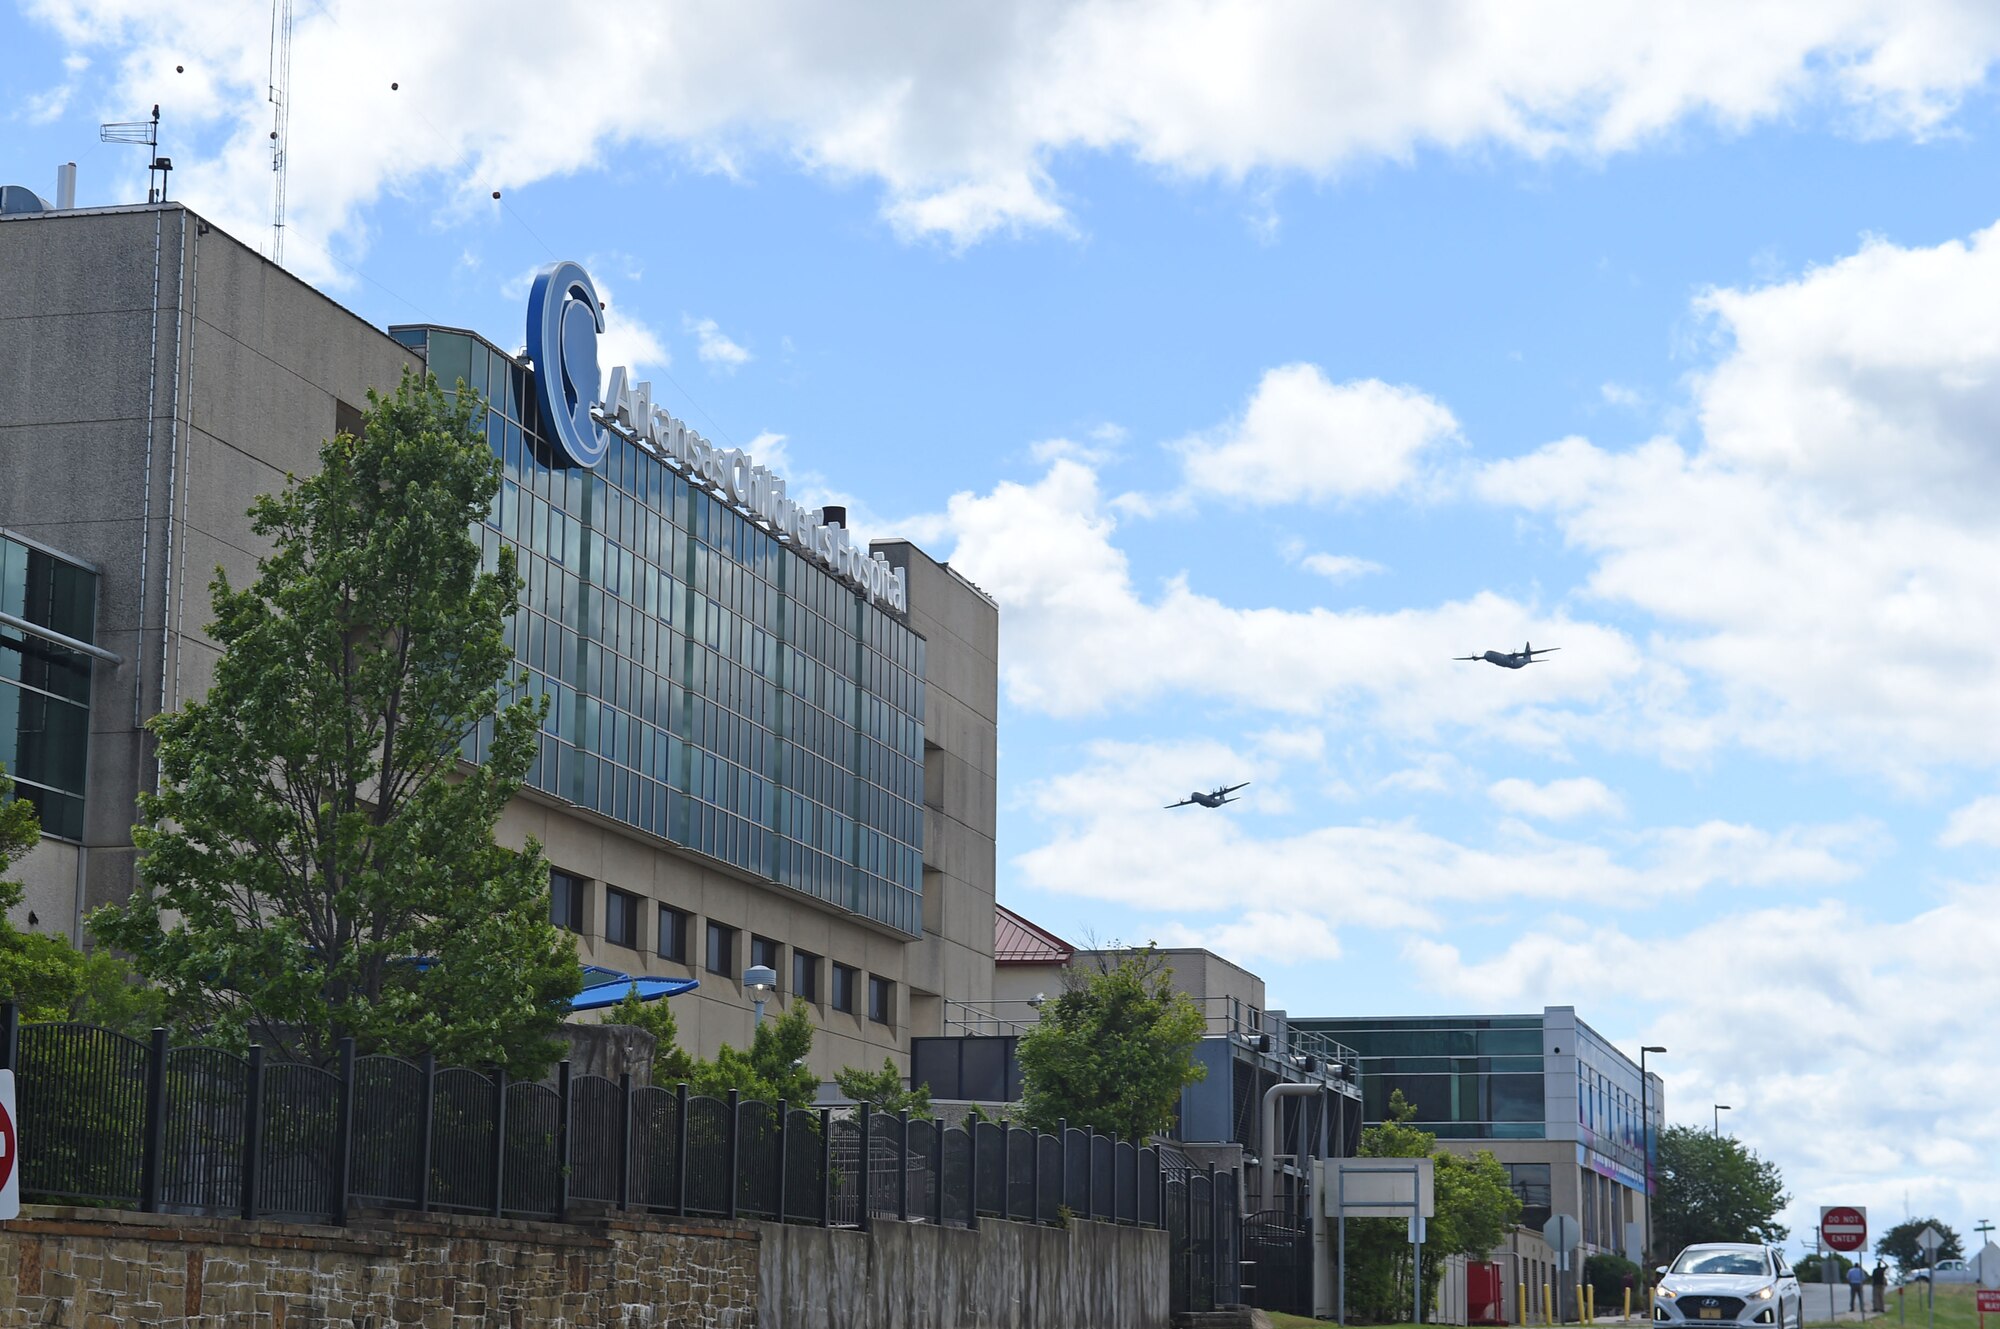 Spectators watch as two C-130s fly over the city